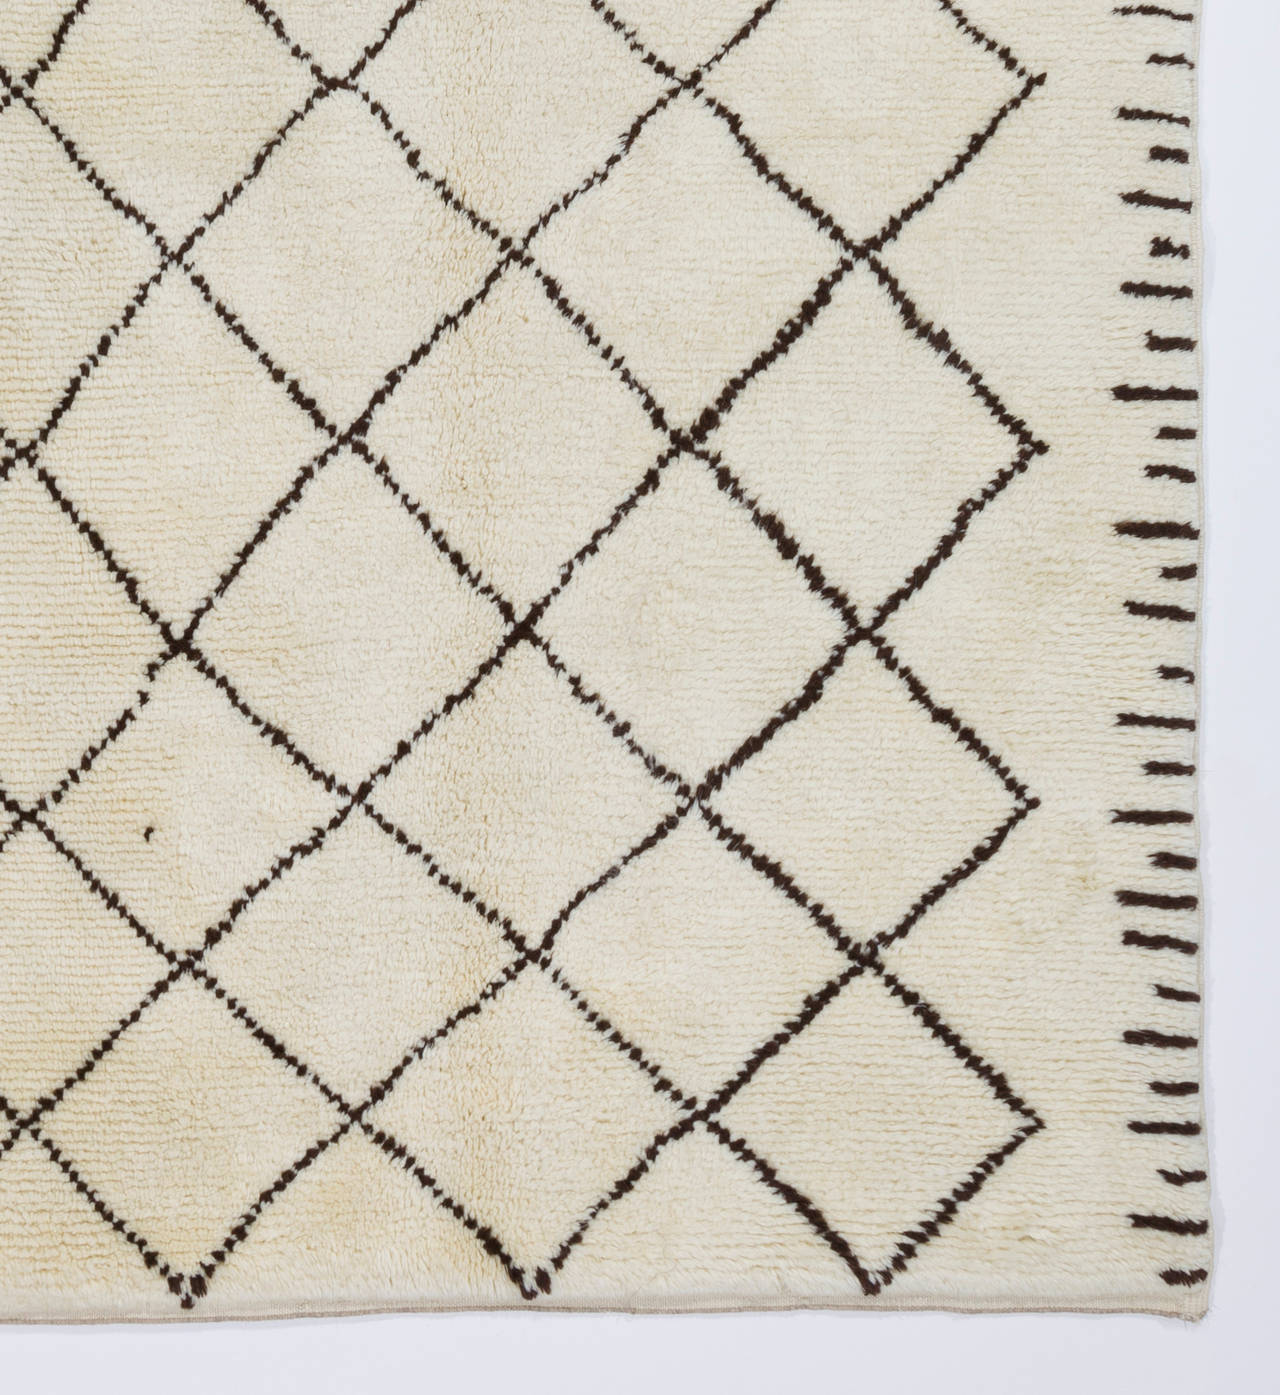 A contemporary handmade rug made of natural un-dyed cream/ivory and dark brown sheep wool. The design is based on vintage Moroccan rugs. 

The rug is available as seen or if requested, it can be custom produced in a different size, color combination